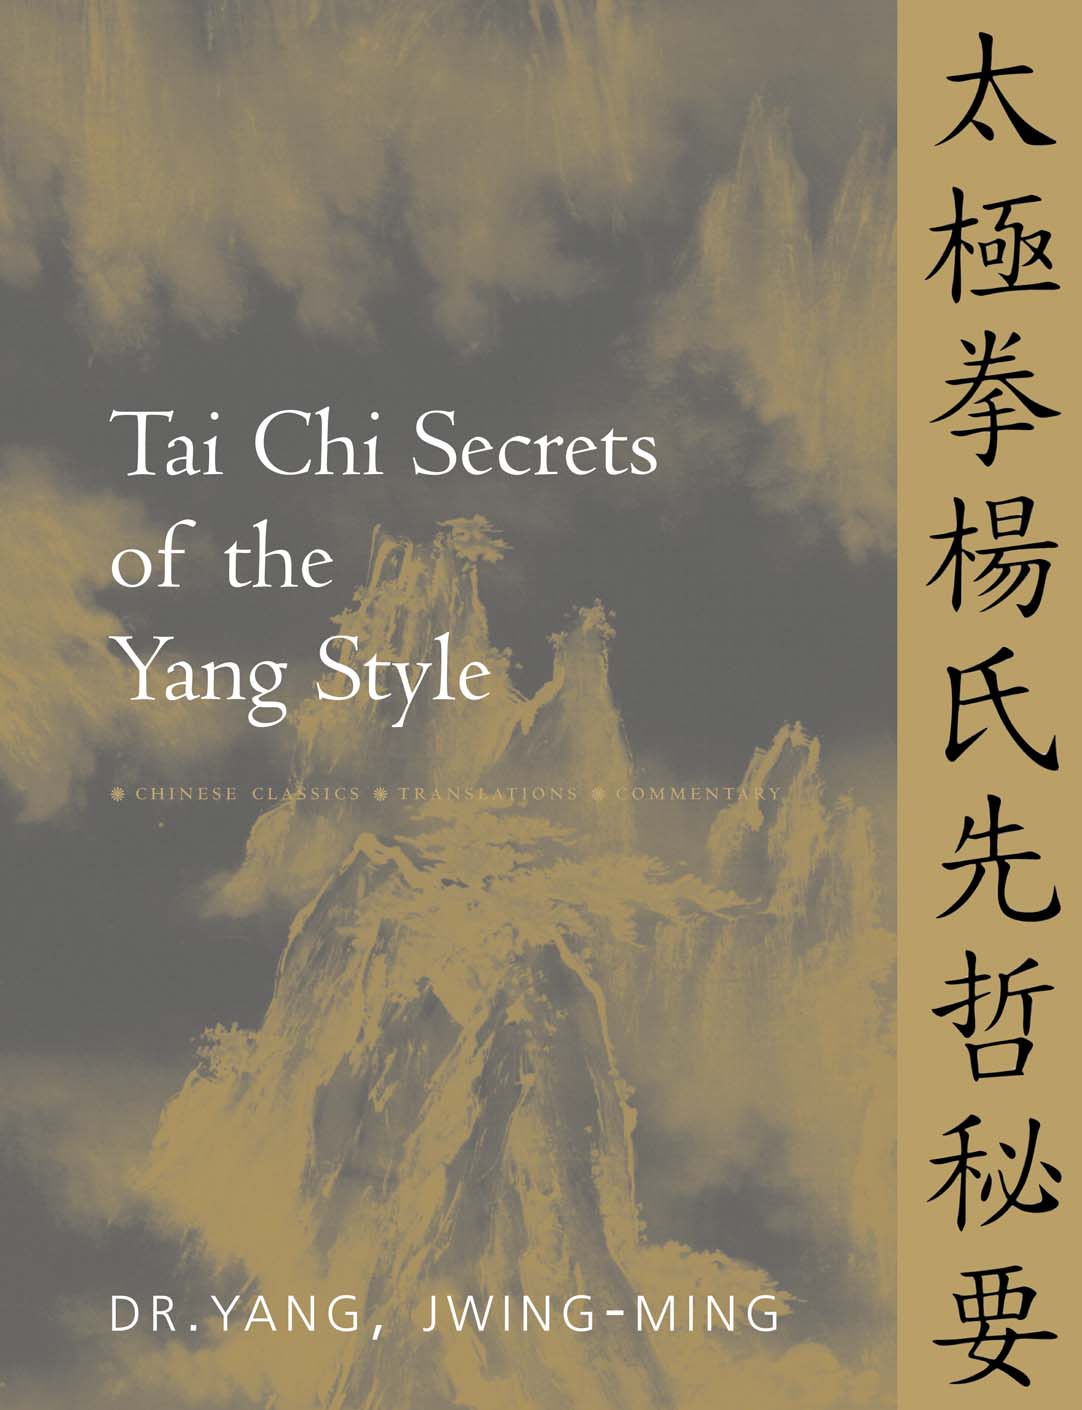 Tai Chi Secrets of the Yang Style—Chinese Classics, Translations, Commentary Book by Dr Yang, Jwing-Ming